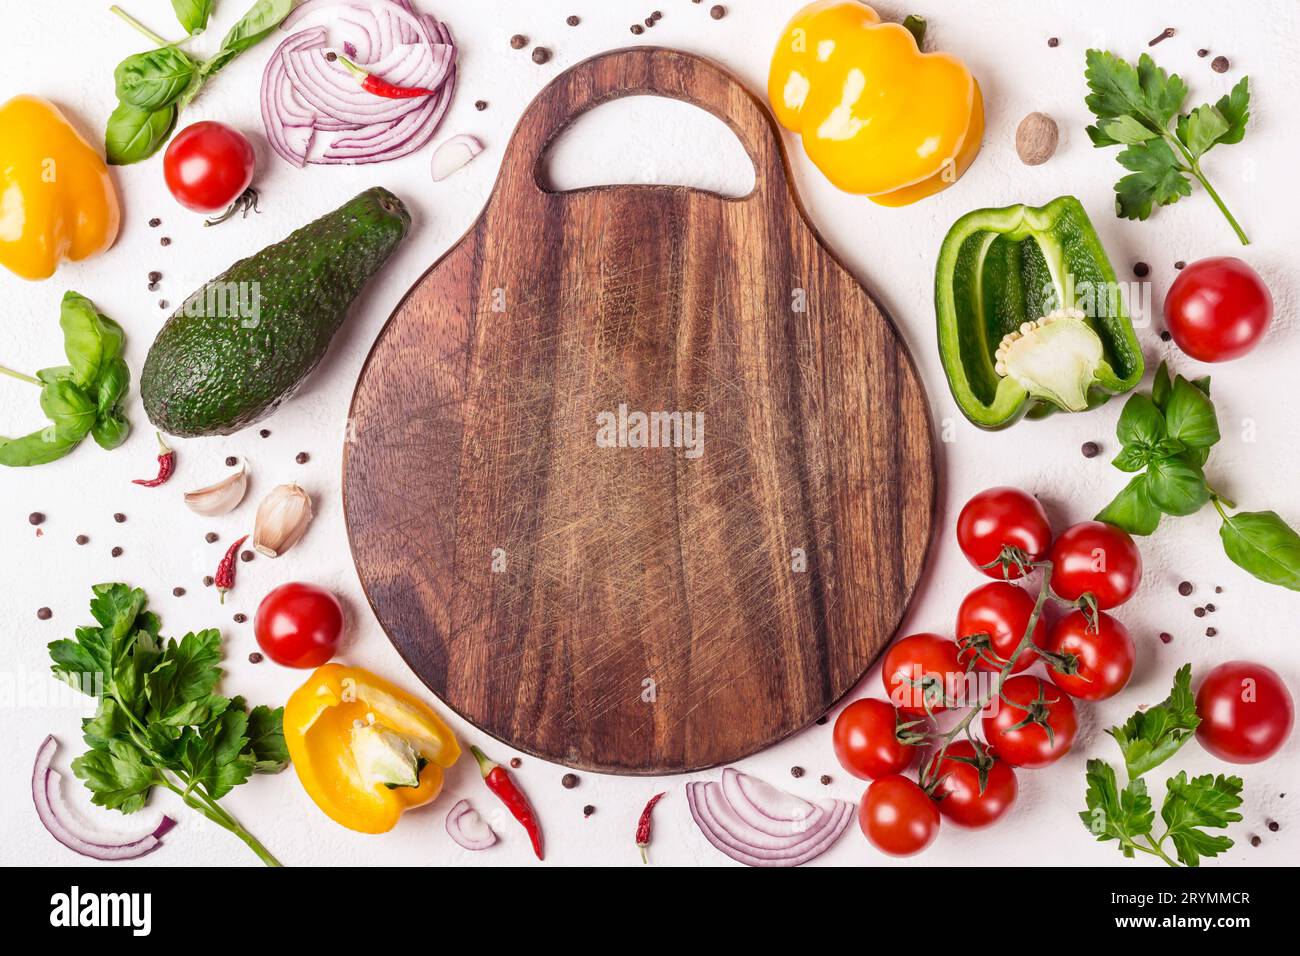 Set of vegetables and herbs around a wooden cutting board. European cuisine and cooking concept Stock Photo